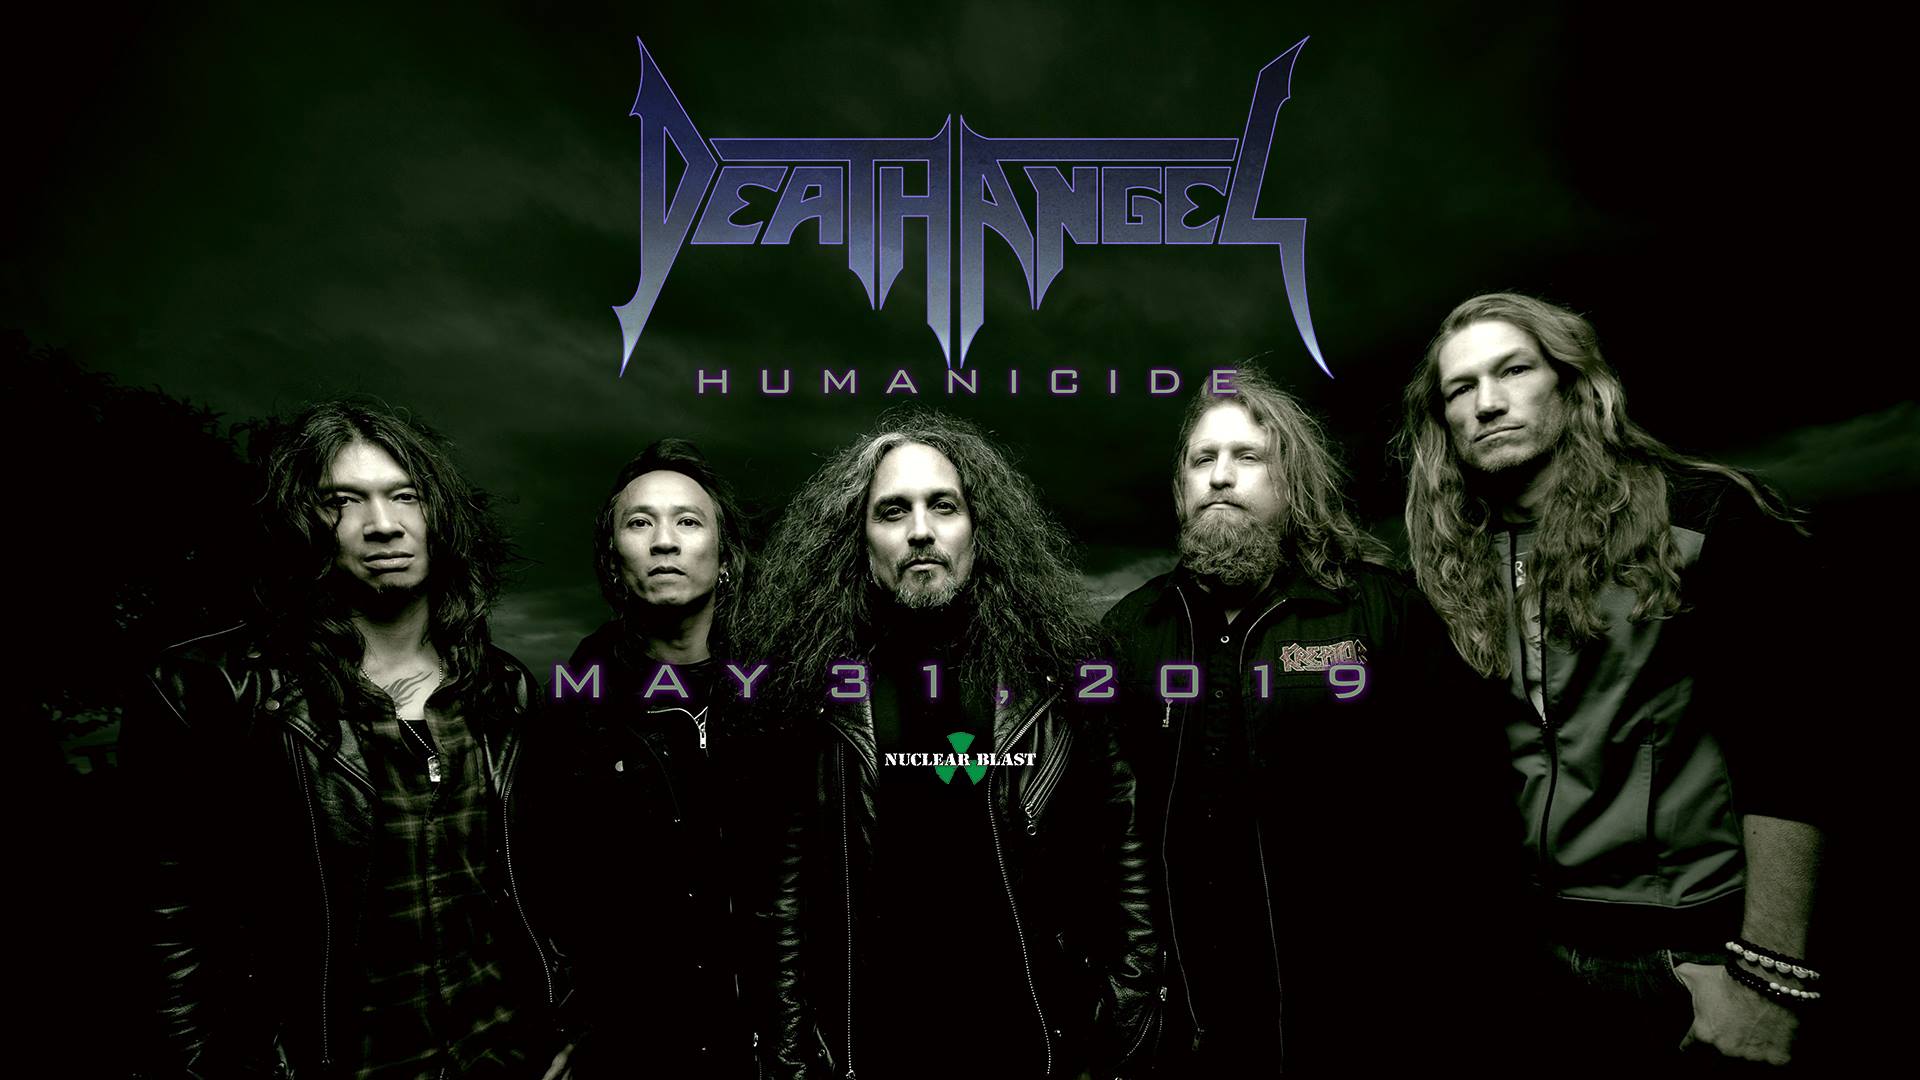 DEATH ANGEL announces first headlining tour in many years of North